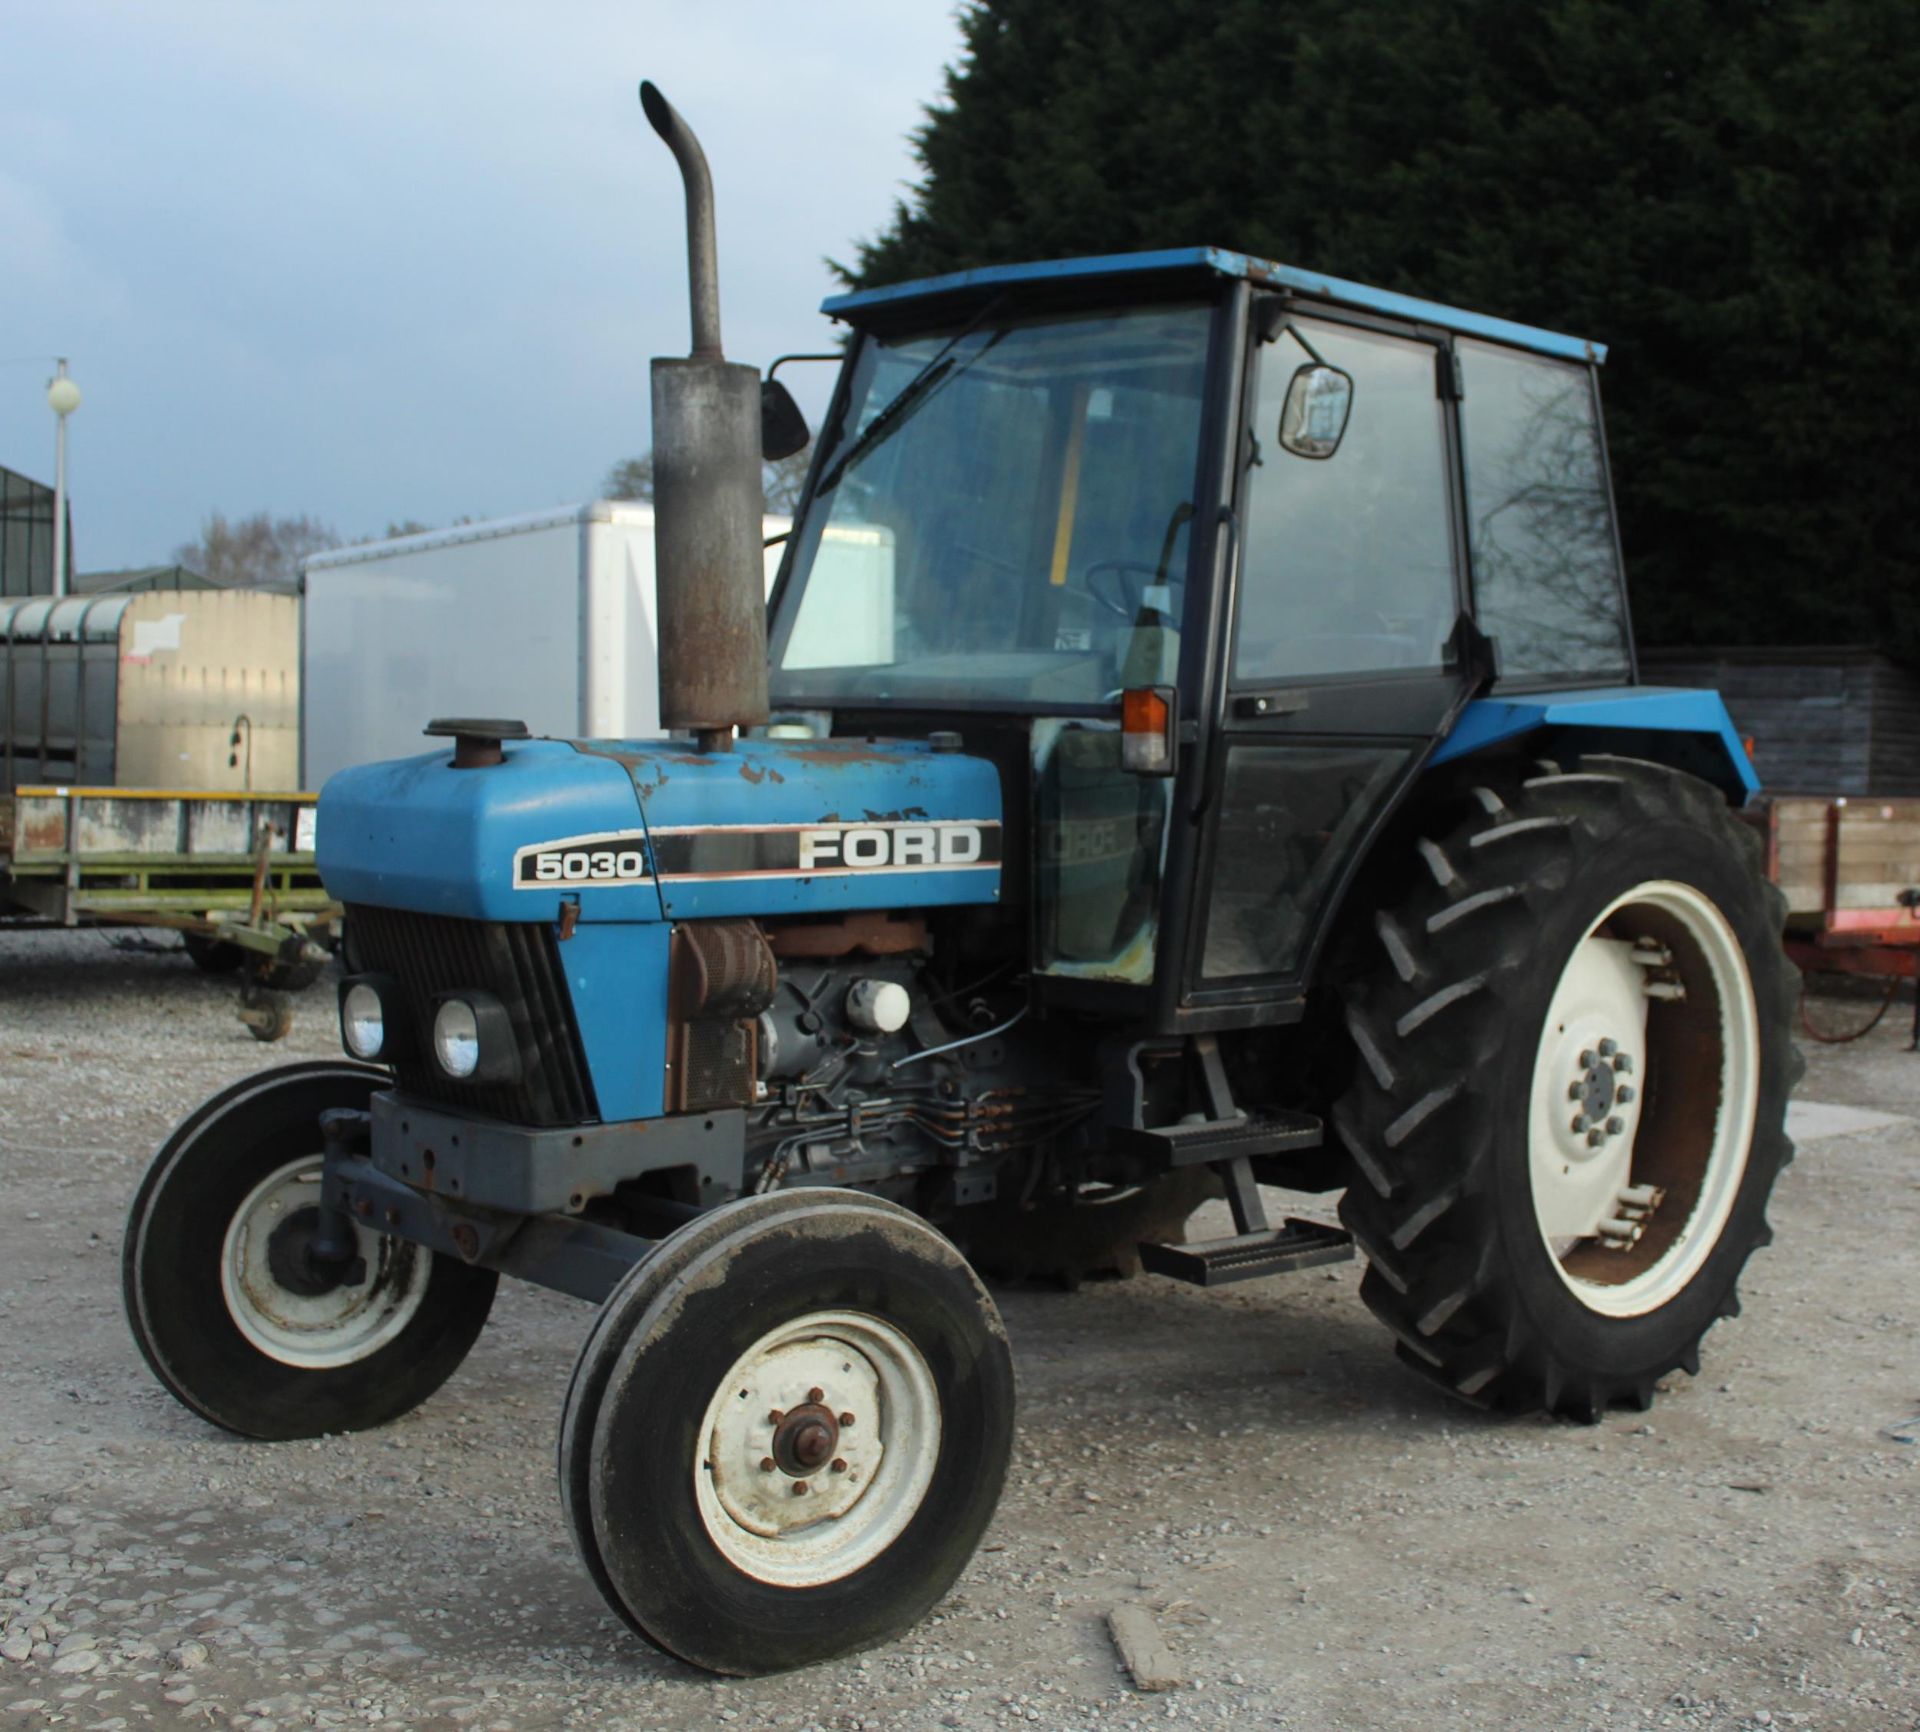 FORD 5030 2 WHEEL DRIVE TRACTOR 9014 HOURS ONE OWNER FROM NEW REG.NO. M85 TRC FIRST REG 01/06/95 - Image 2 of 13